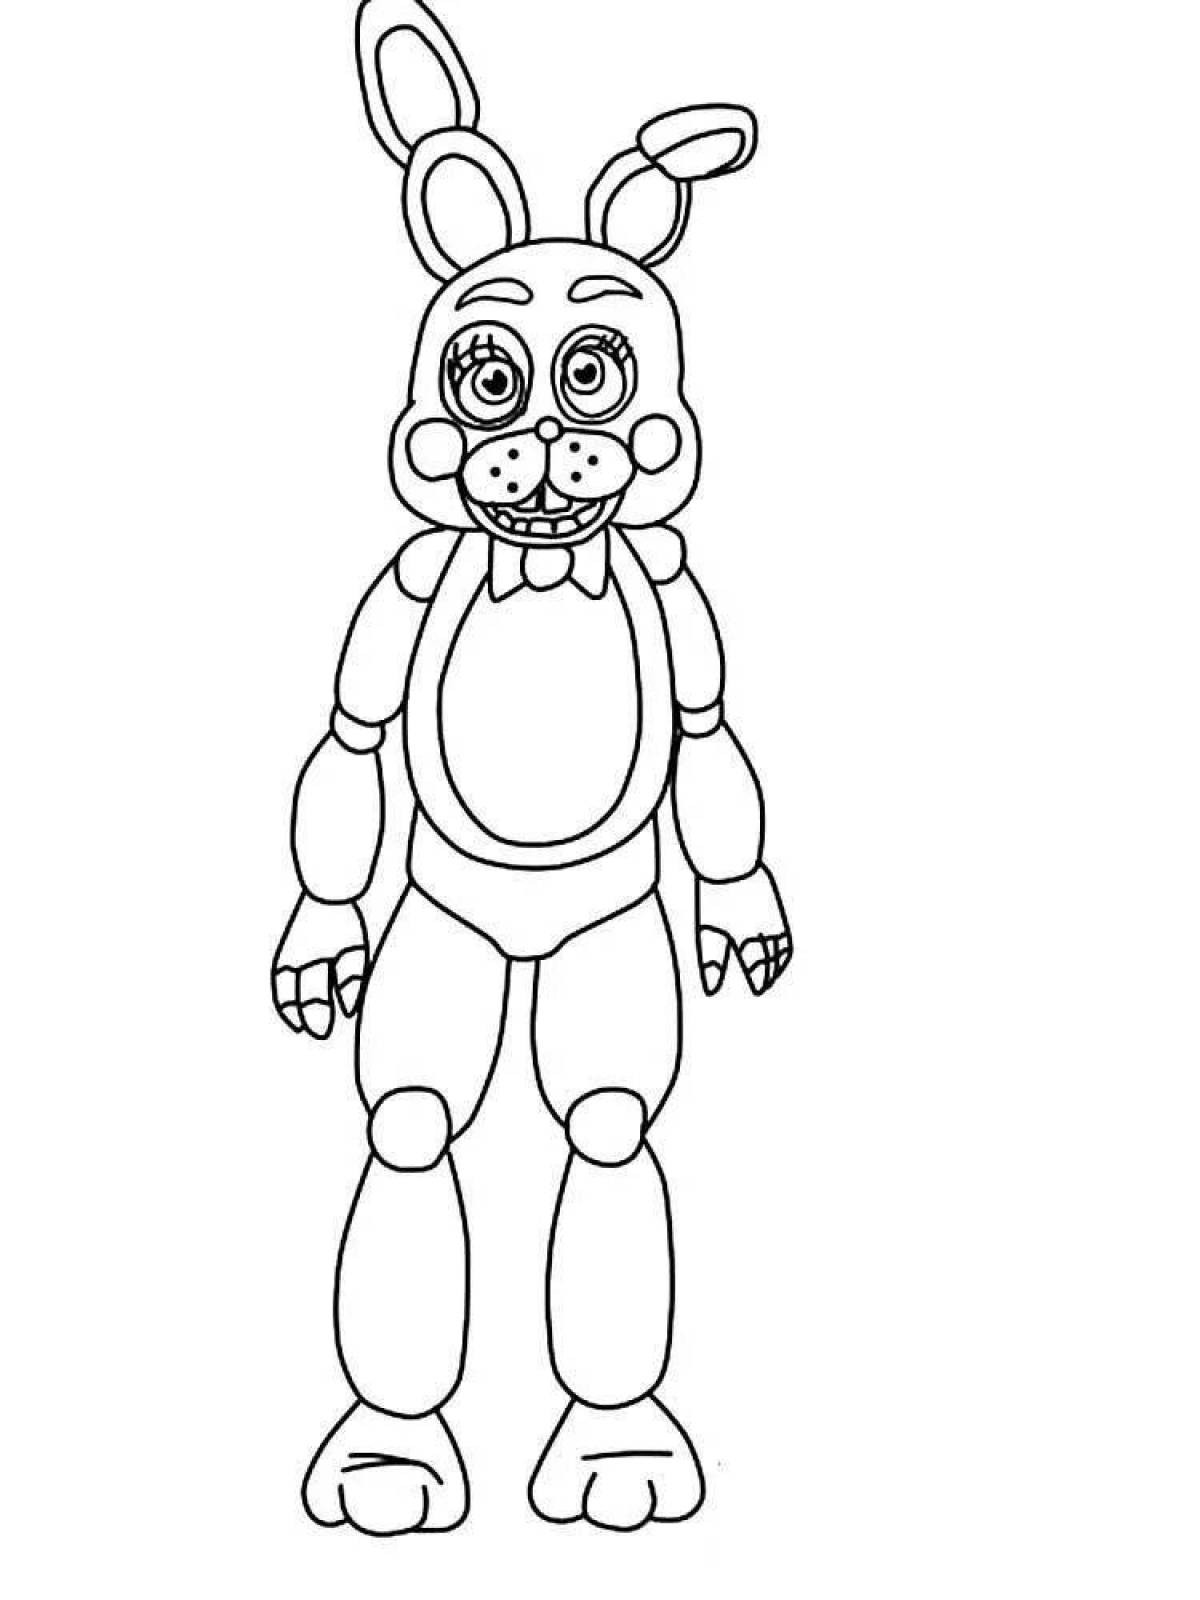 Great animatronic coloring book